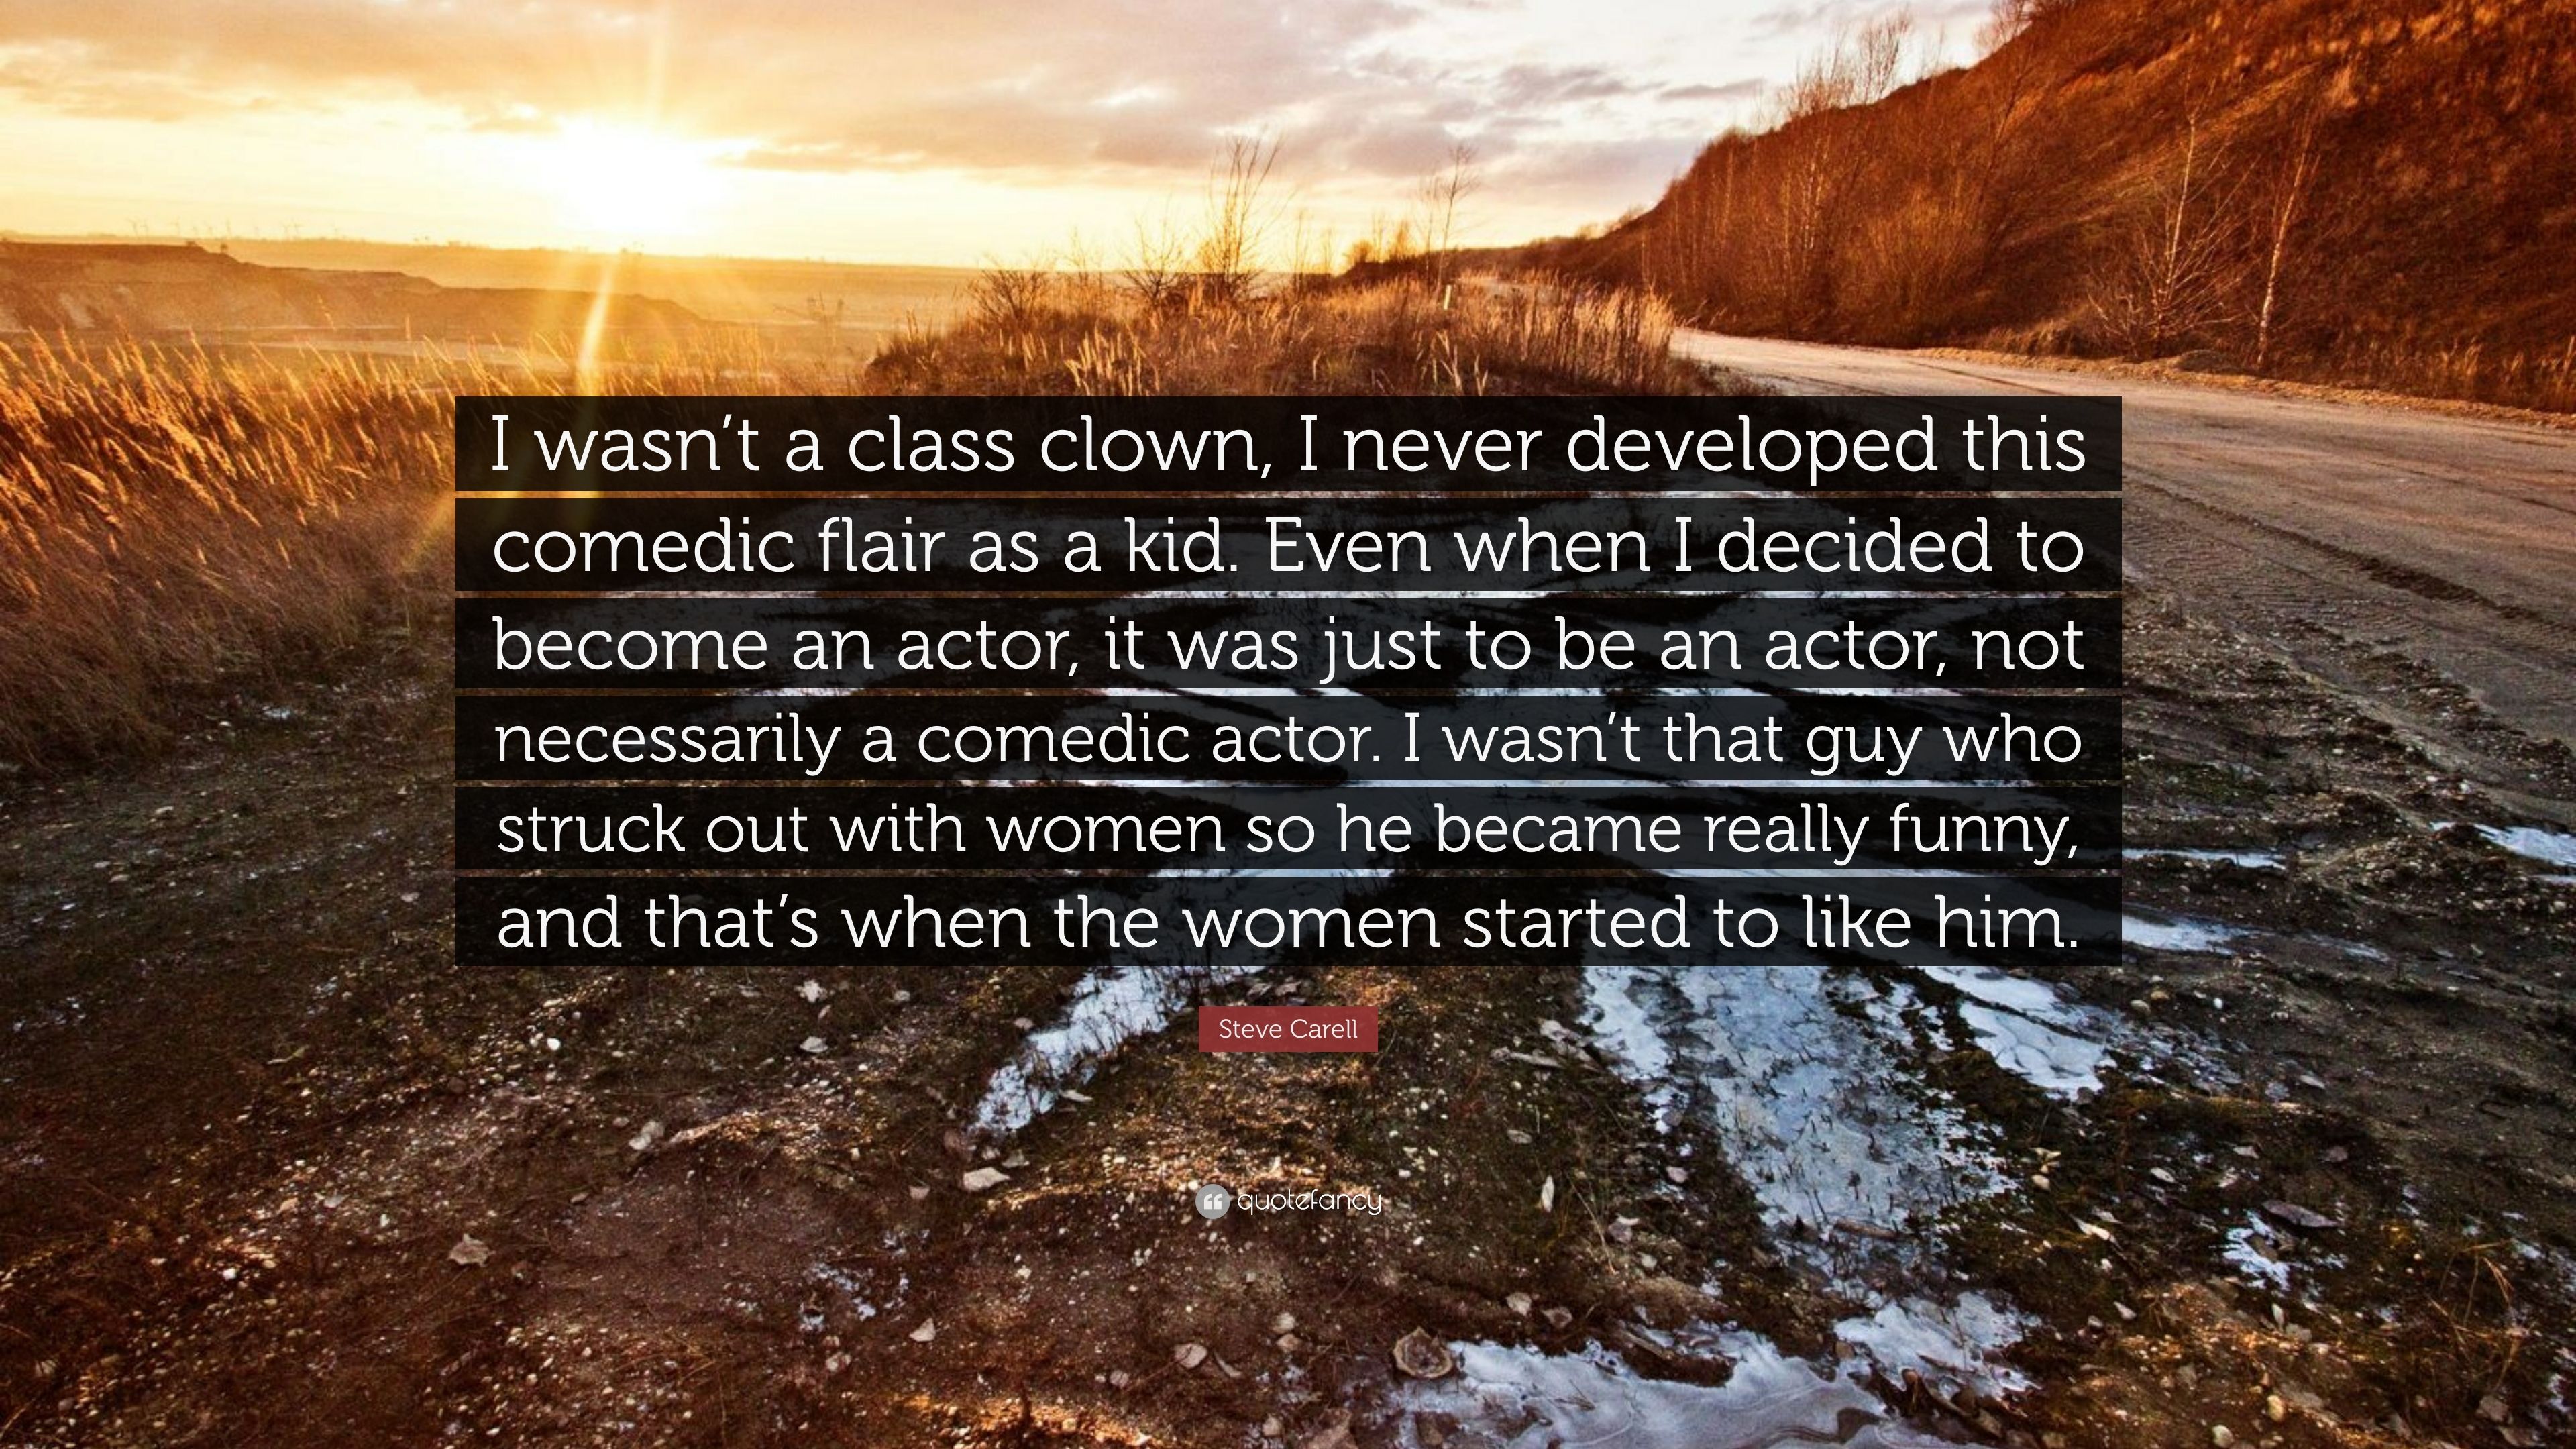 Steve Carell Quote: “I wasn't a class clown, I never developed this